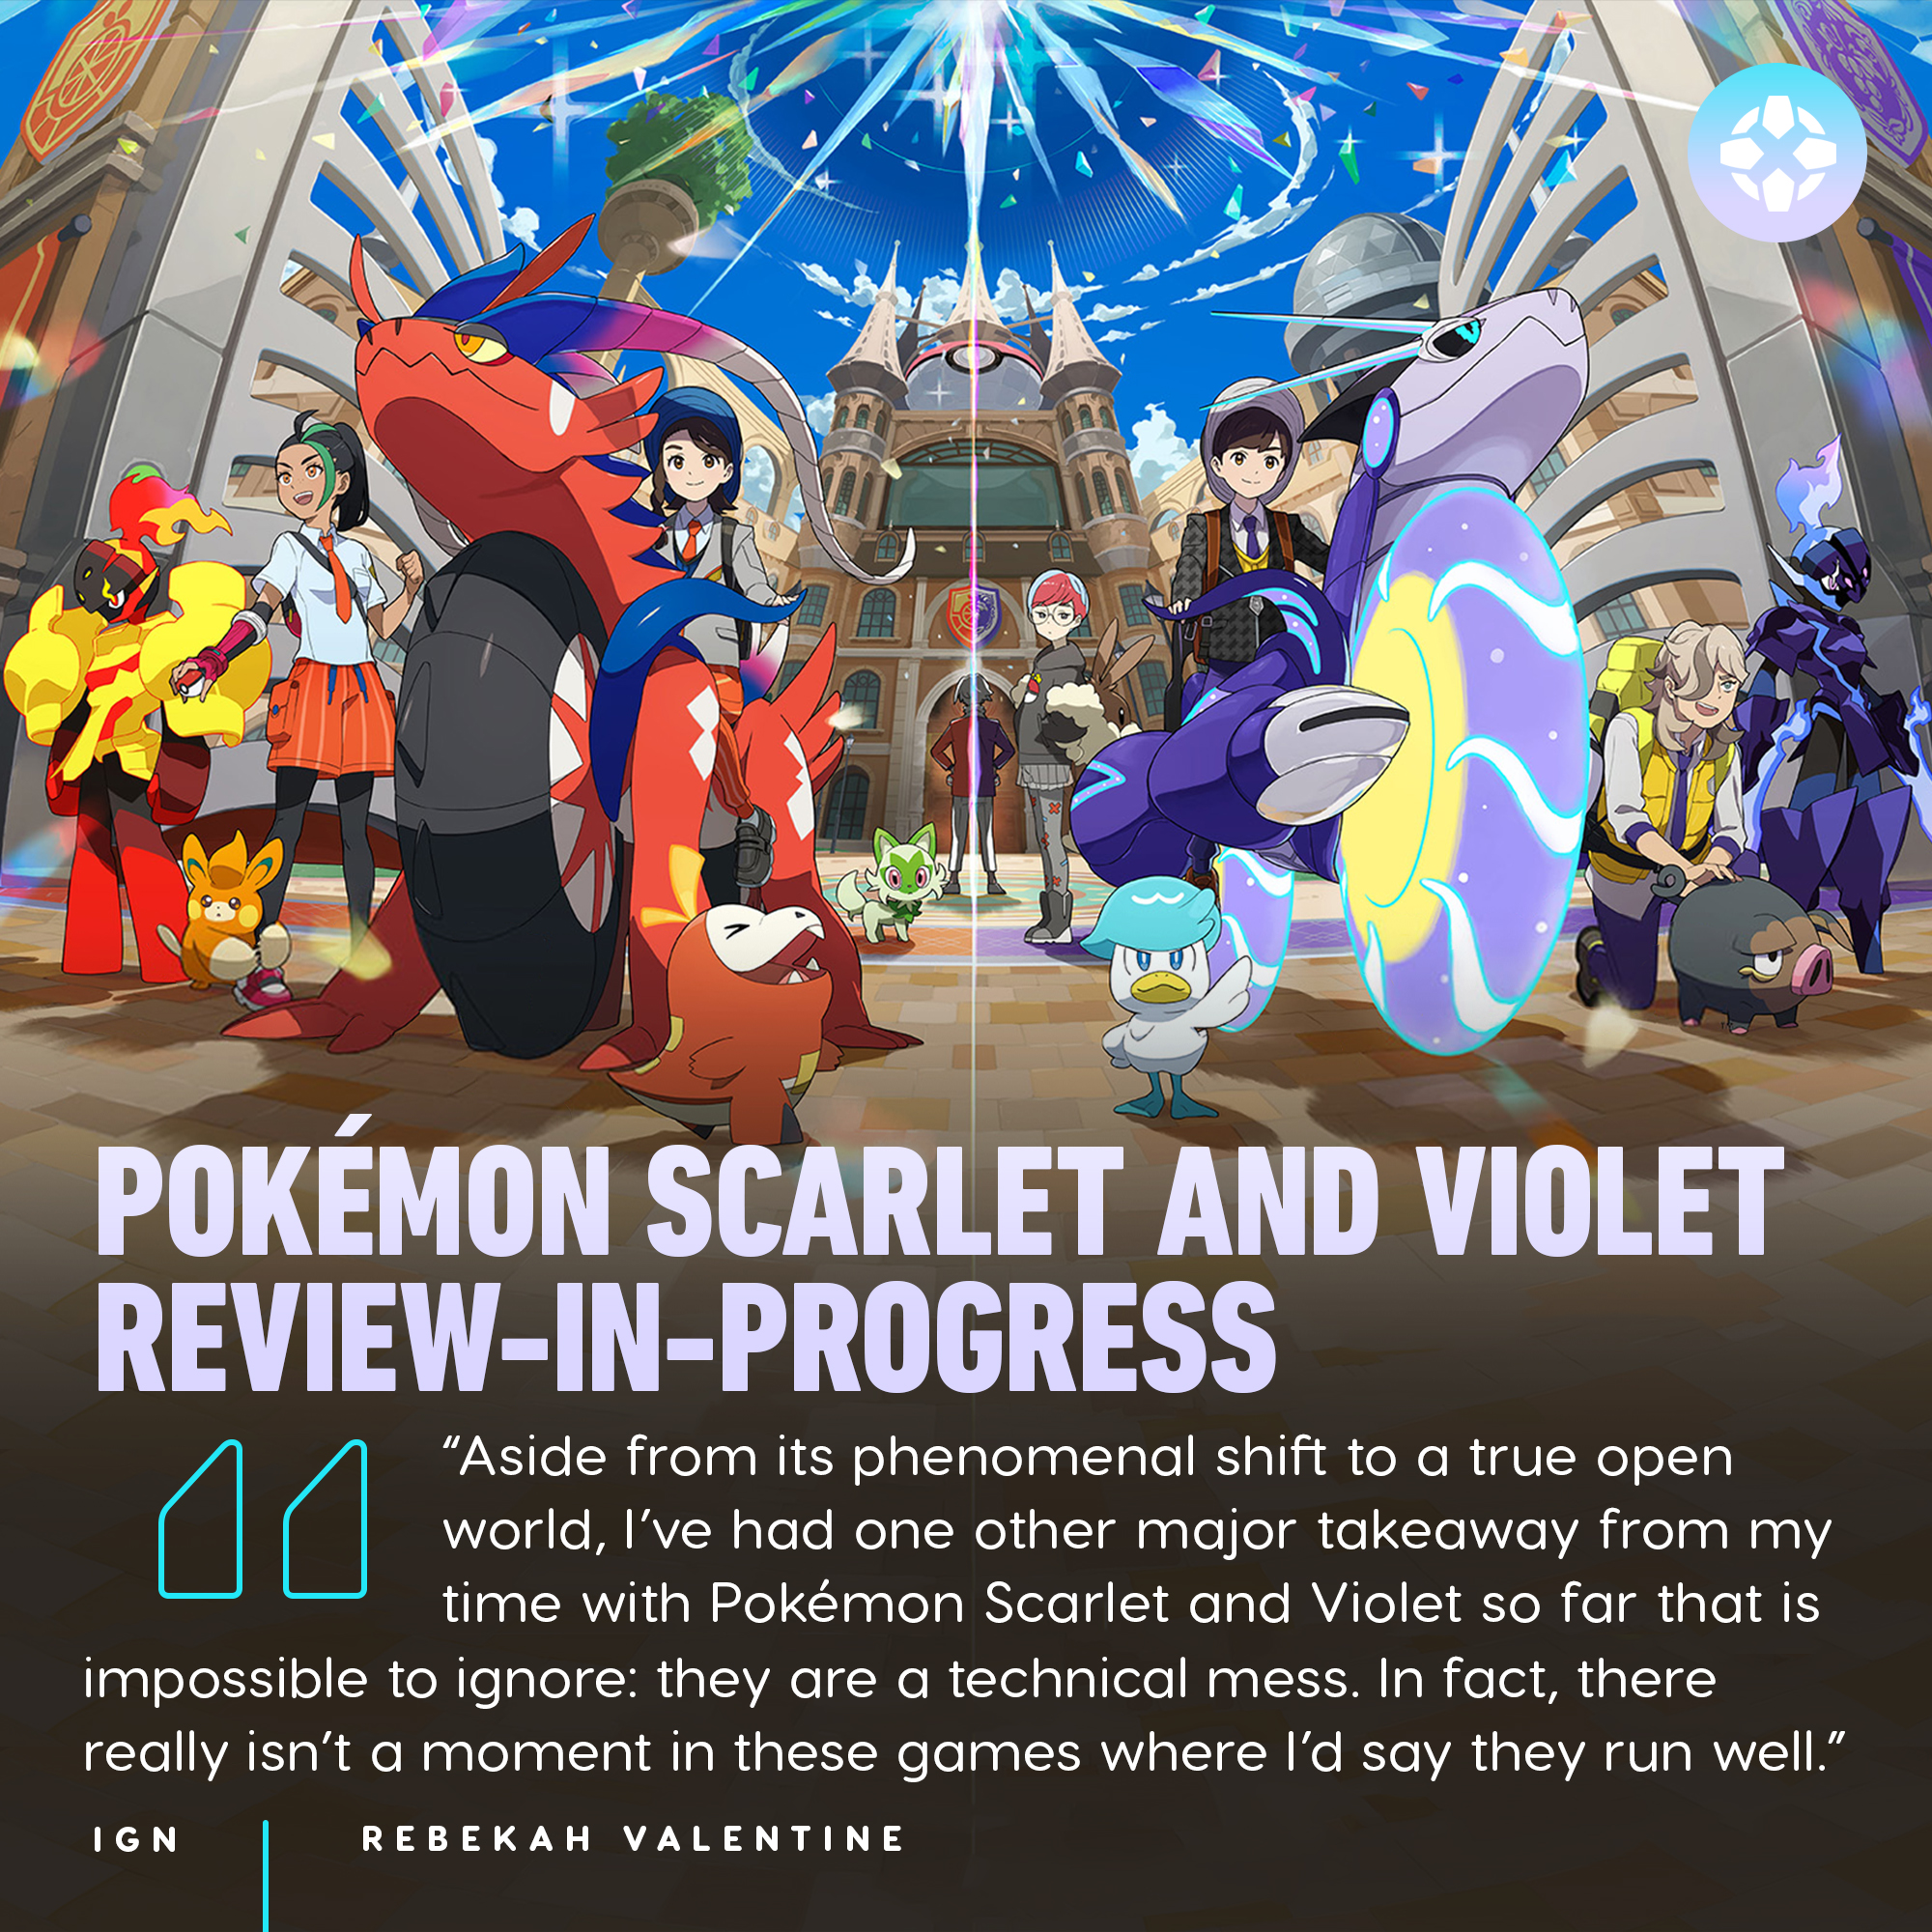 Pokemon Scarlet and Violet Performance Review 